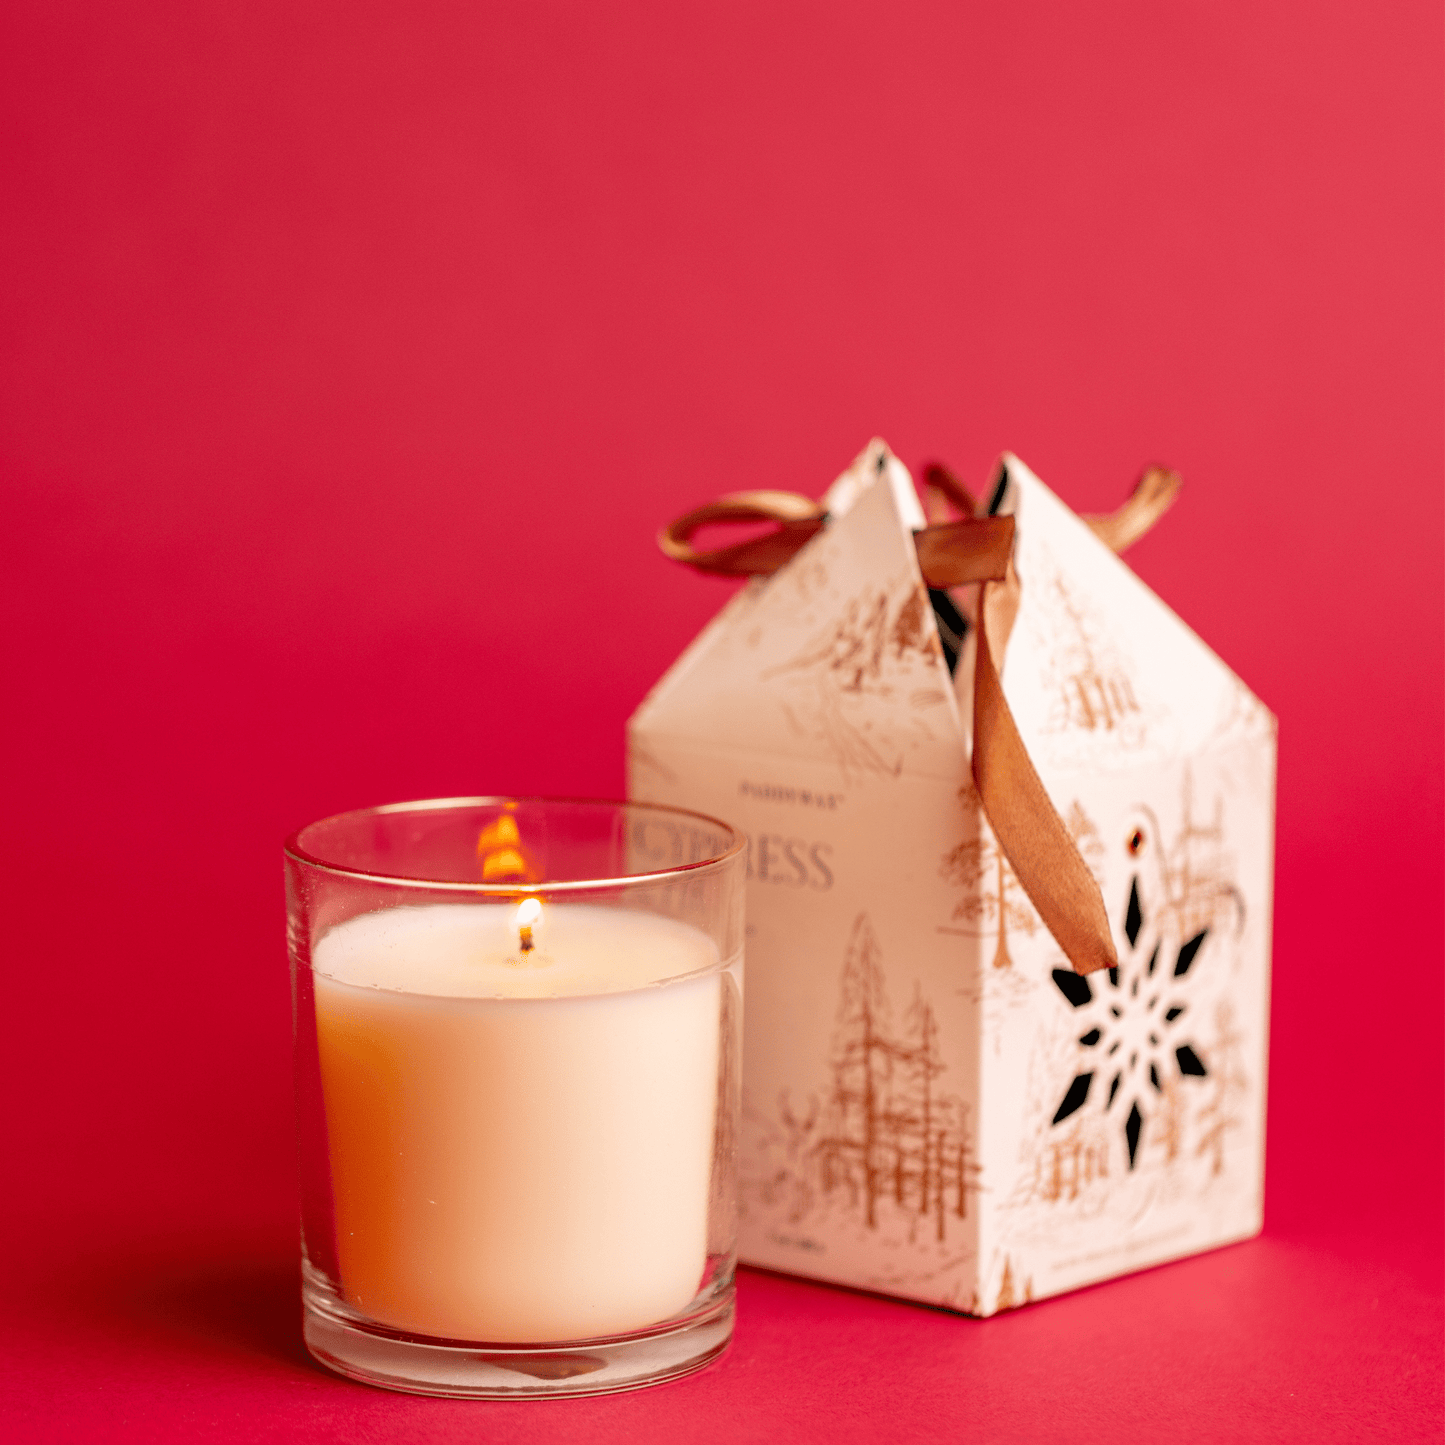 7 oz Glass Candle lit with Ornament Gift Box slightly out of focus on red background